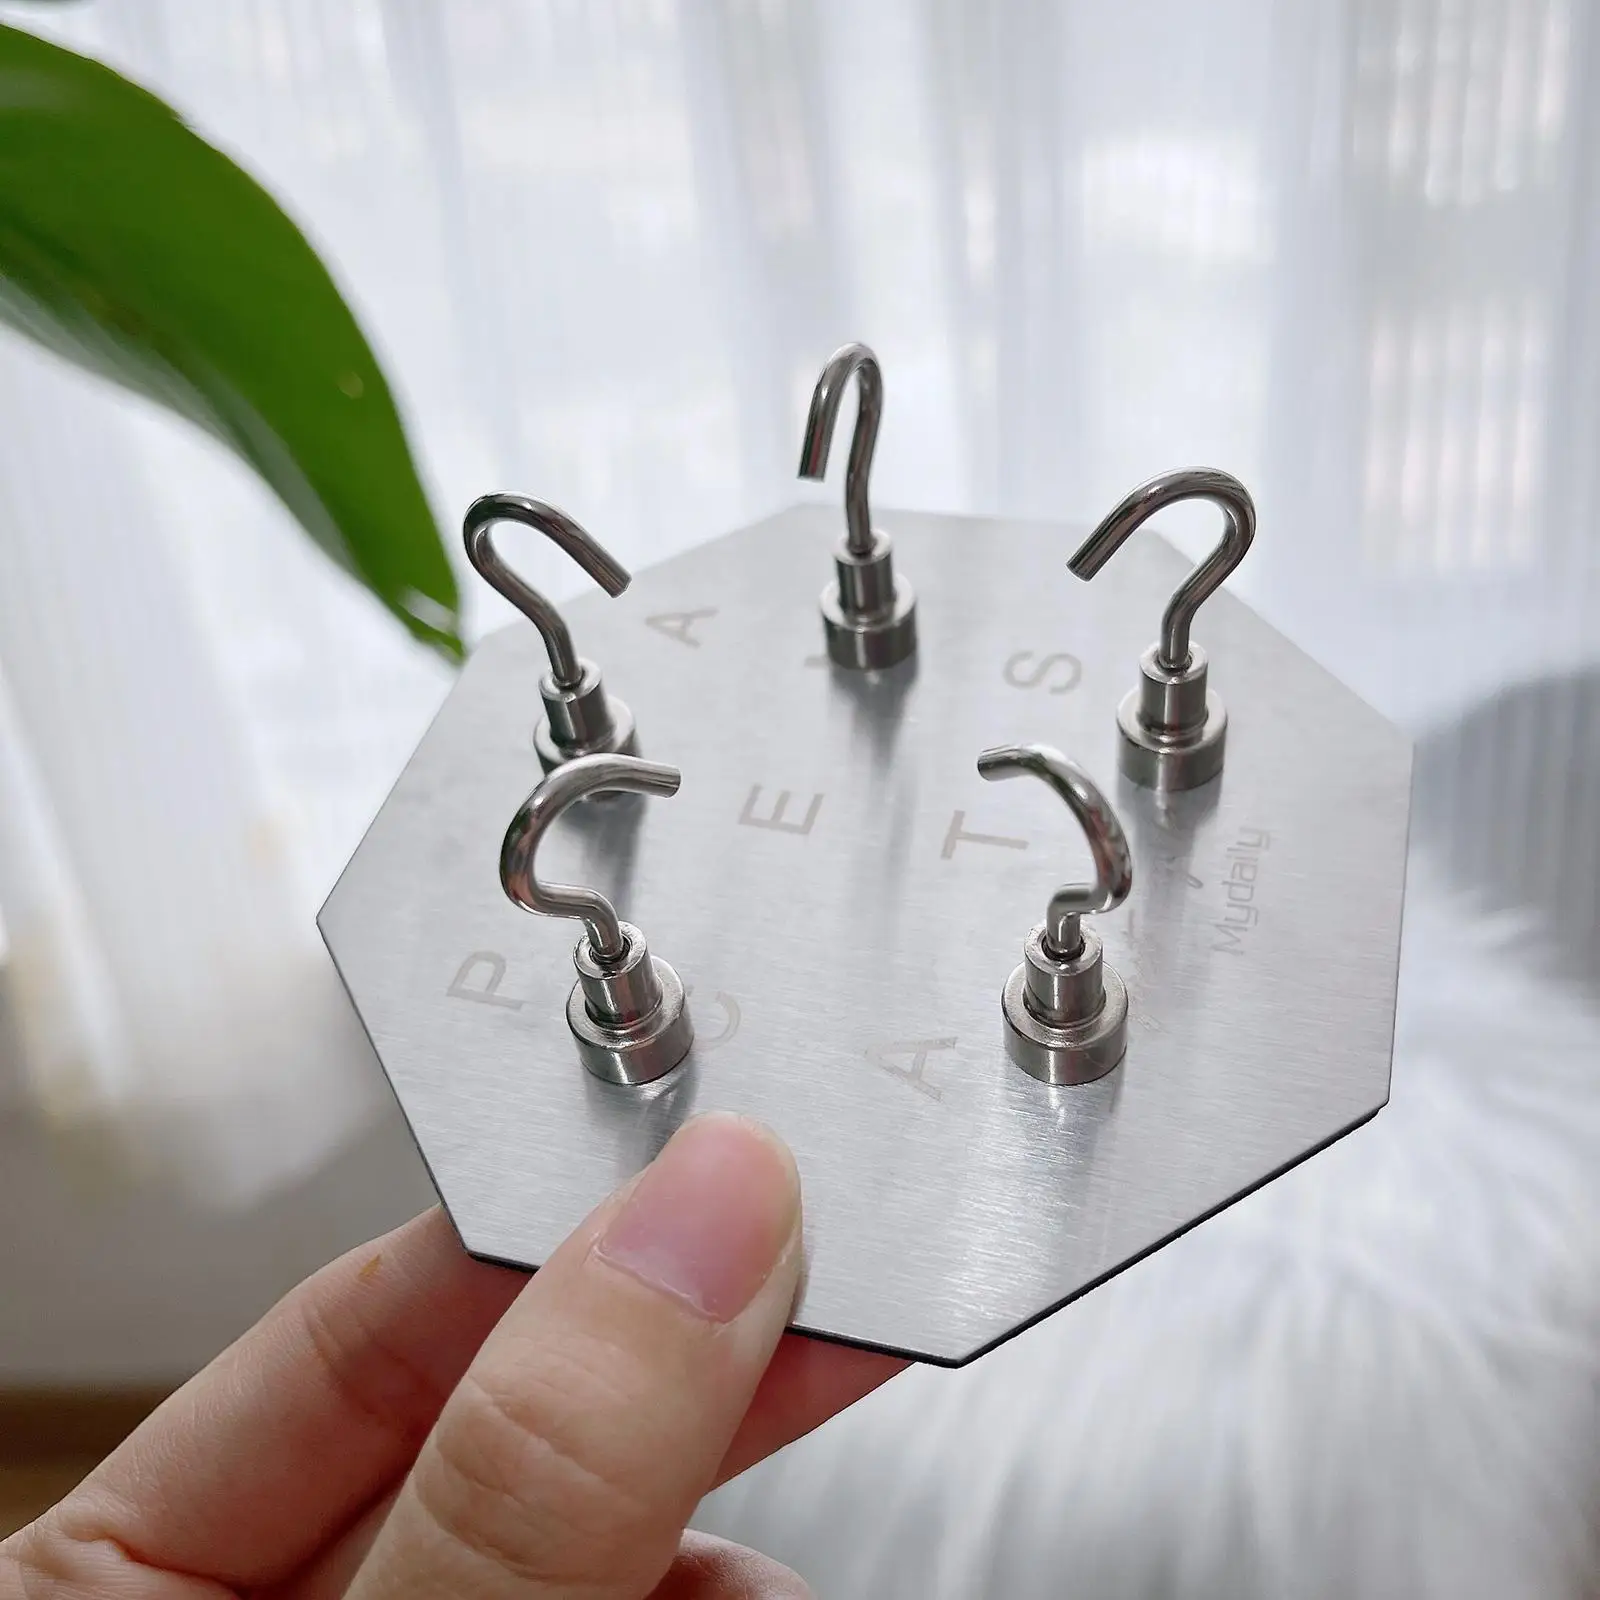 Acrylic Nail Practice Stand with Magnetic Base Fingernail Holders Reusable Stainless Steel Training Nail Art Display for Salon